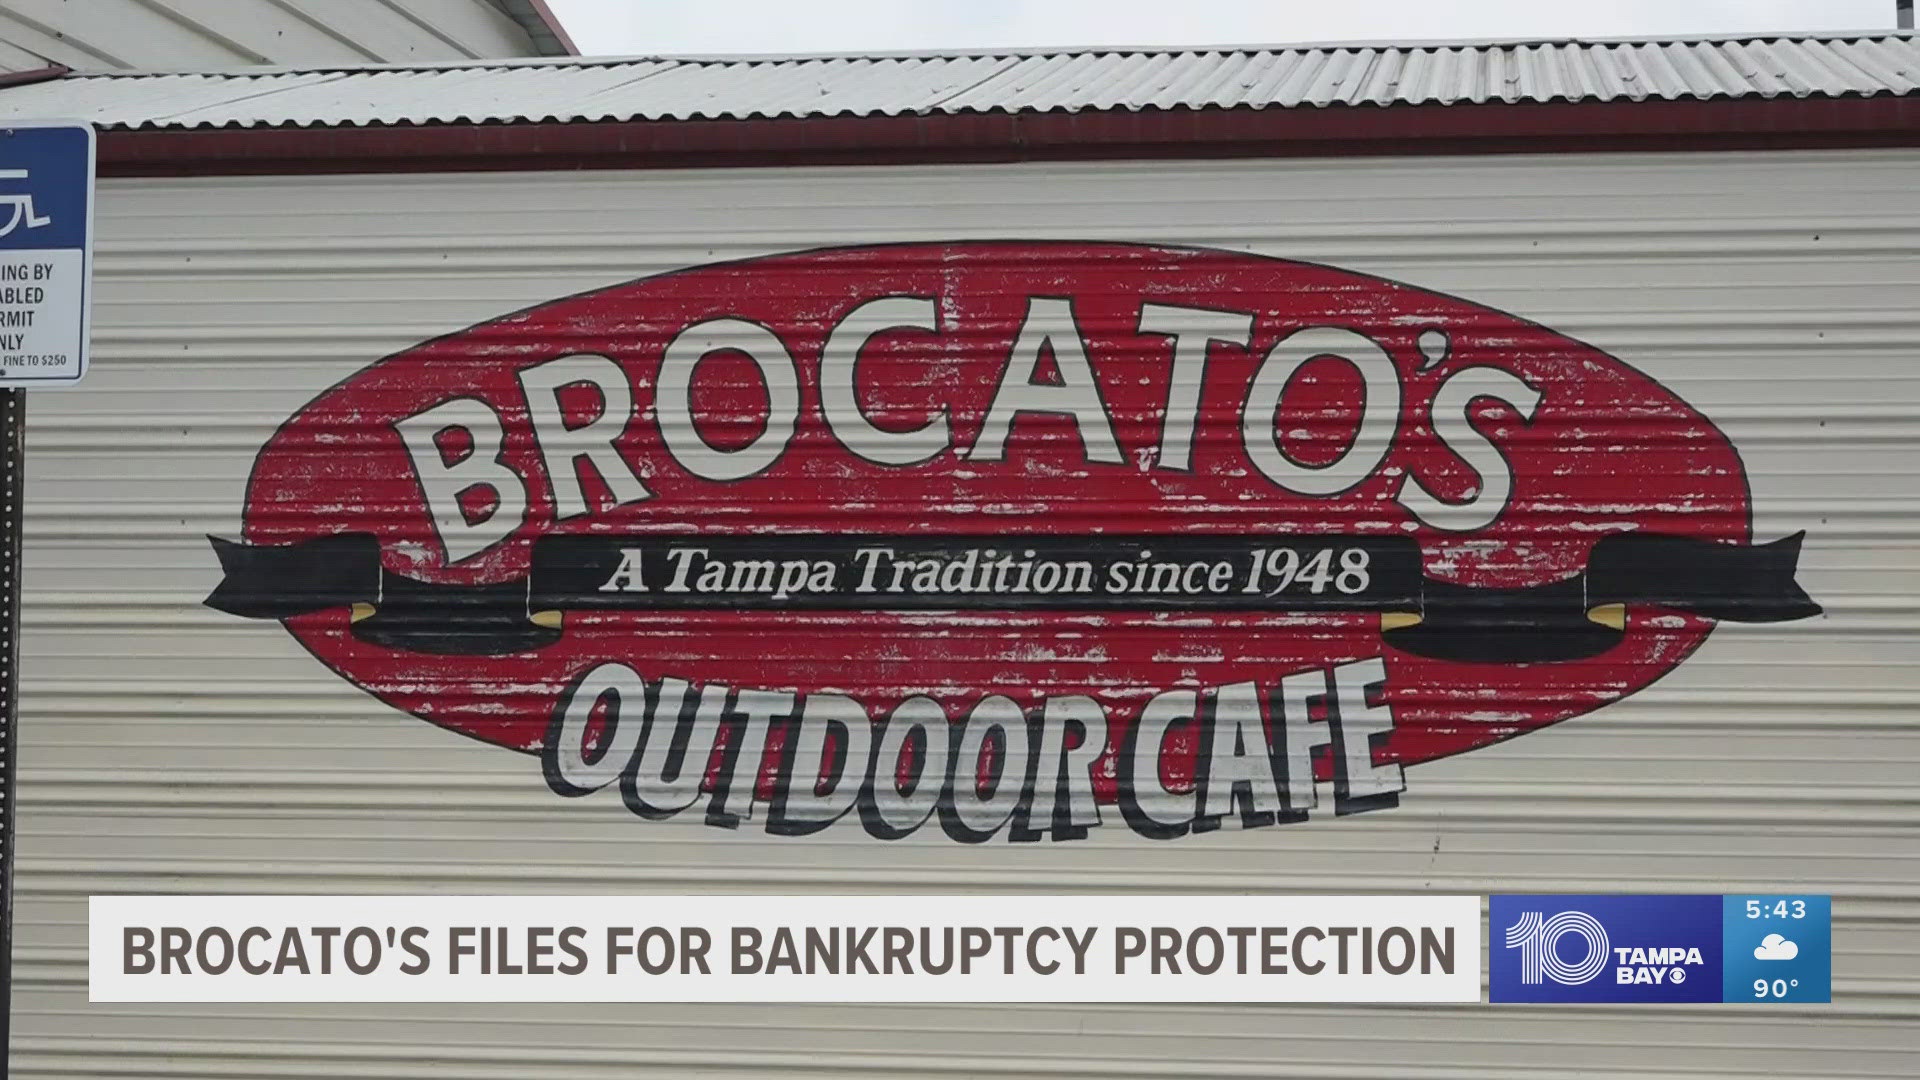 At the time of the bankruptcy filing, Brocato's also had 13 employees. The restructuring plan is in front of a judge for approval.